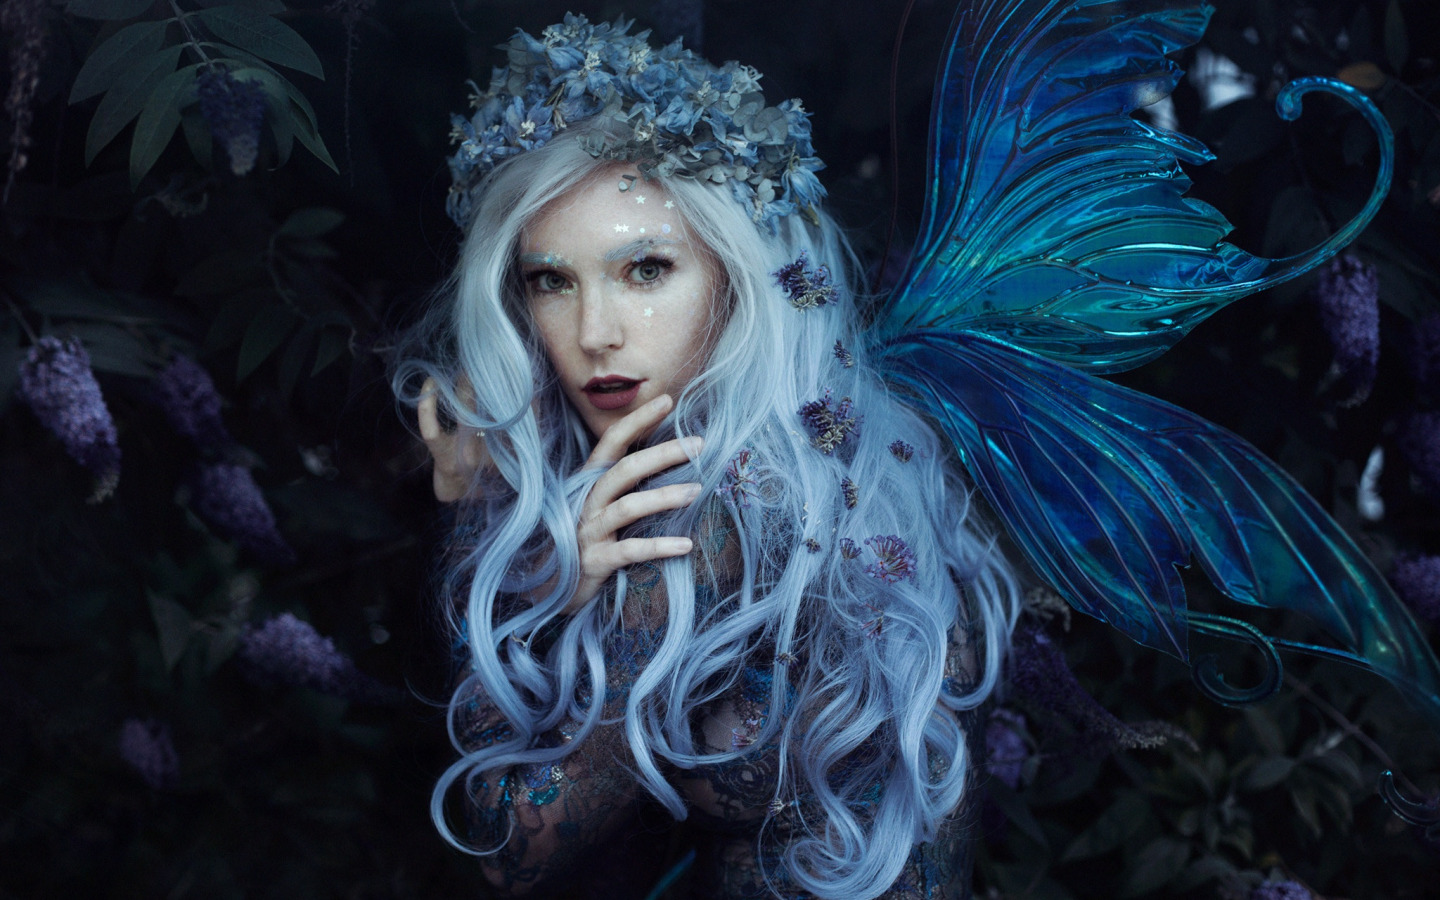 GoodFon.com - Free Wallpapers, download. look, girl, style, hair, fairy, wi...